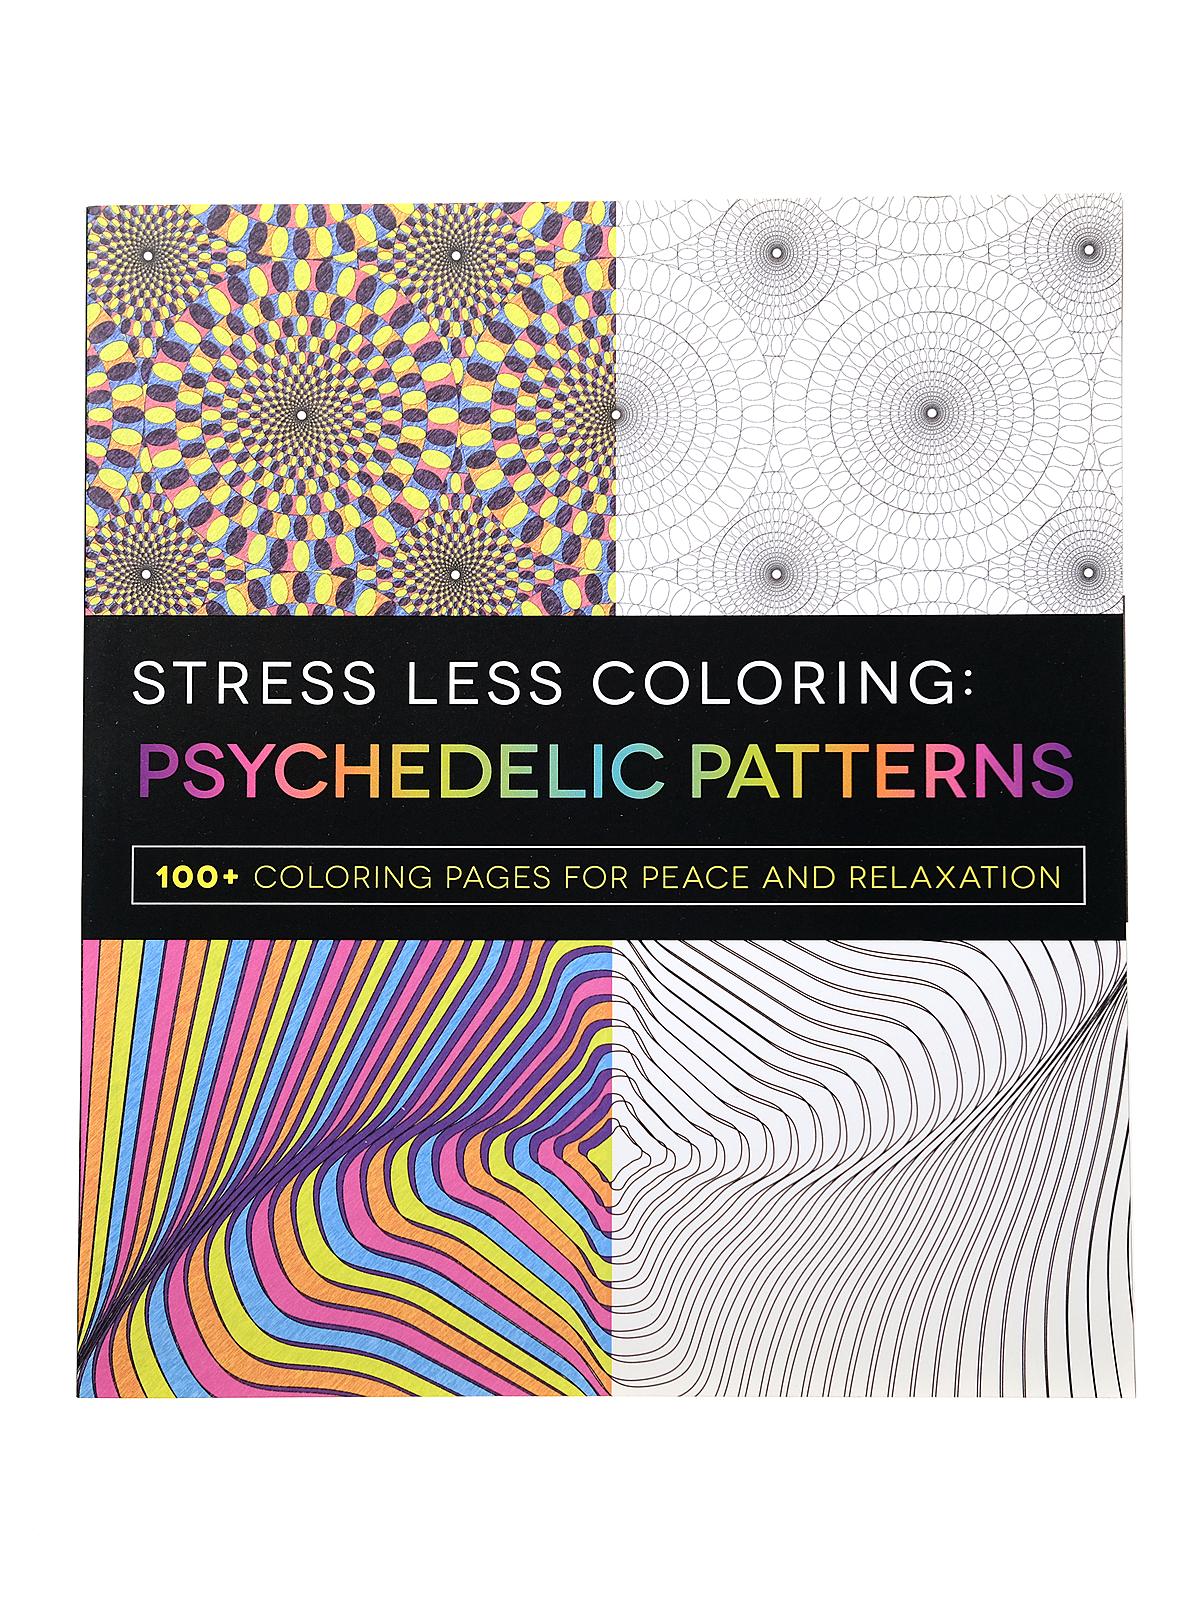 Stress Less Coloring Book Psychedelic Patterns